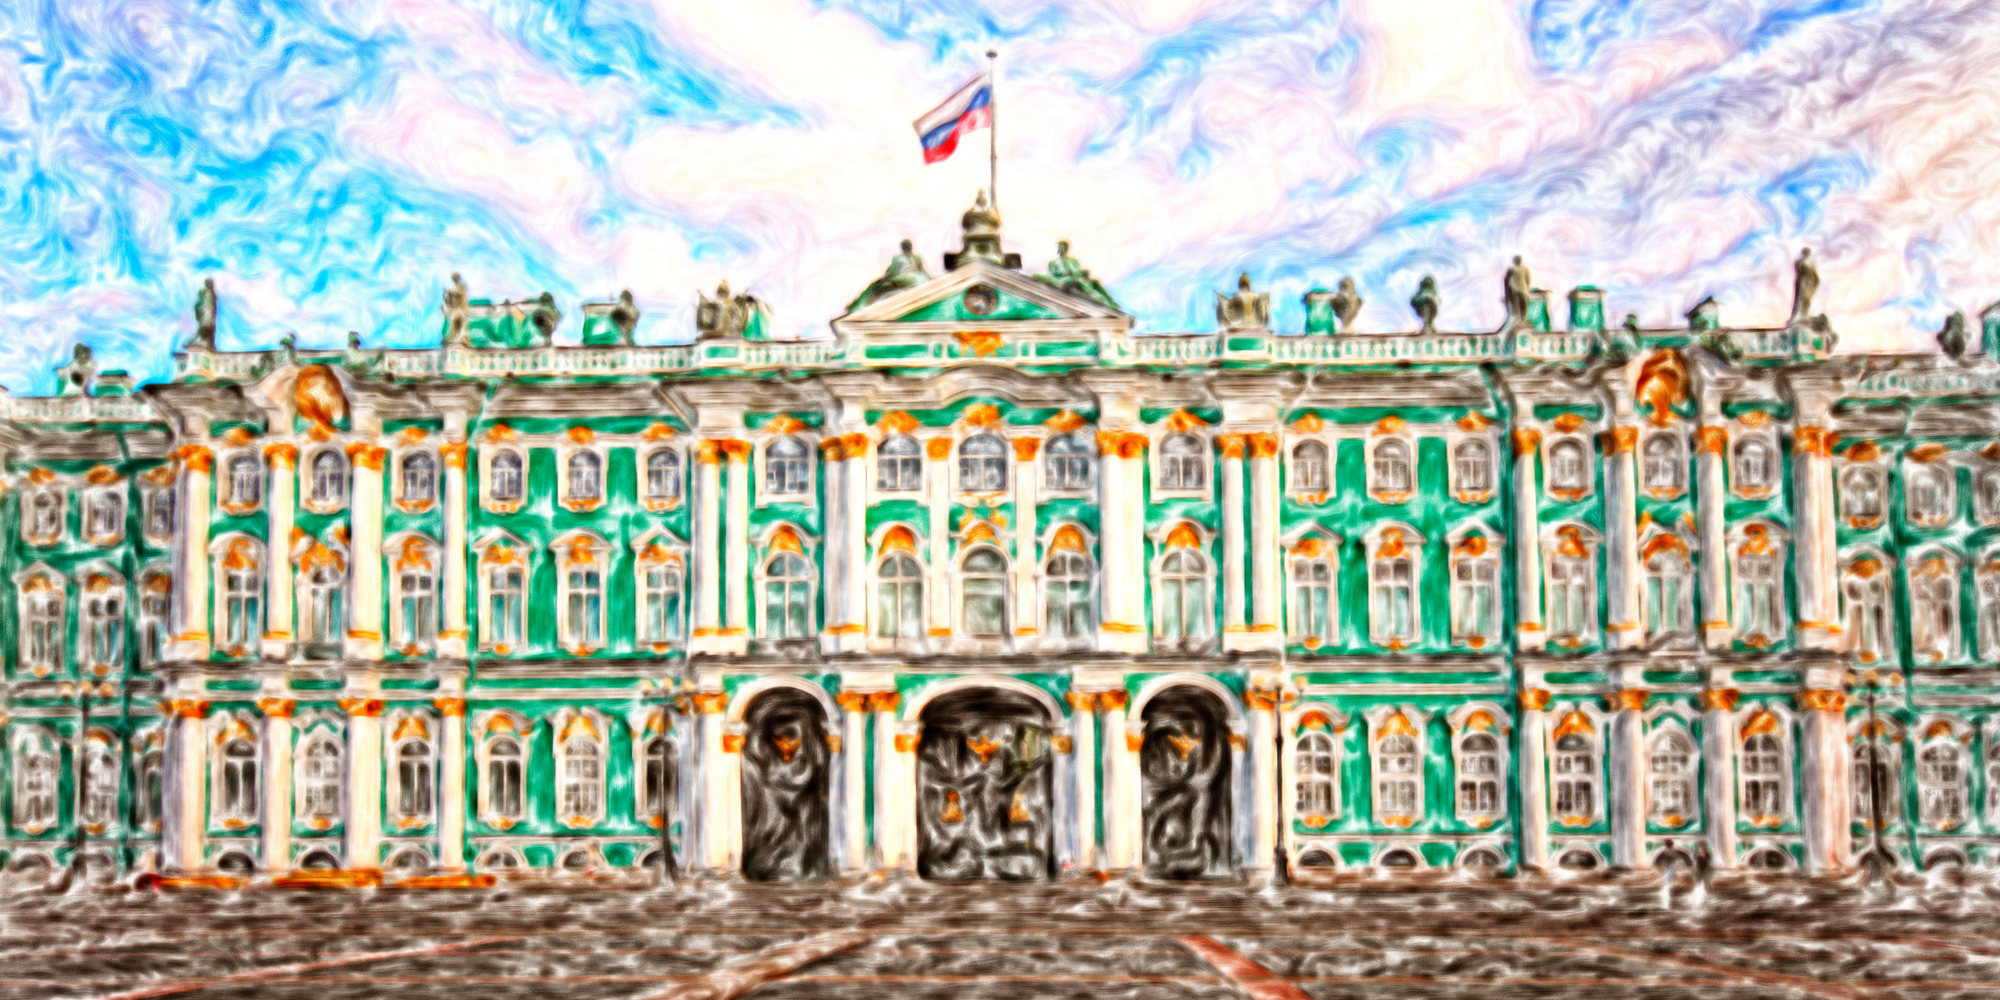 The Winter Palace in Saint Petersburg, Russia Fyodor Dostoevsky. Notes from the underground